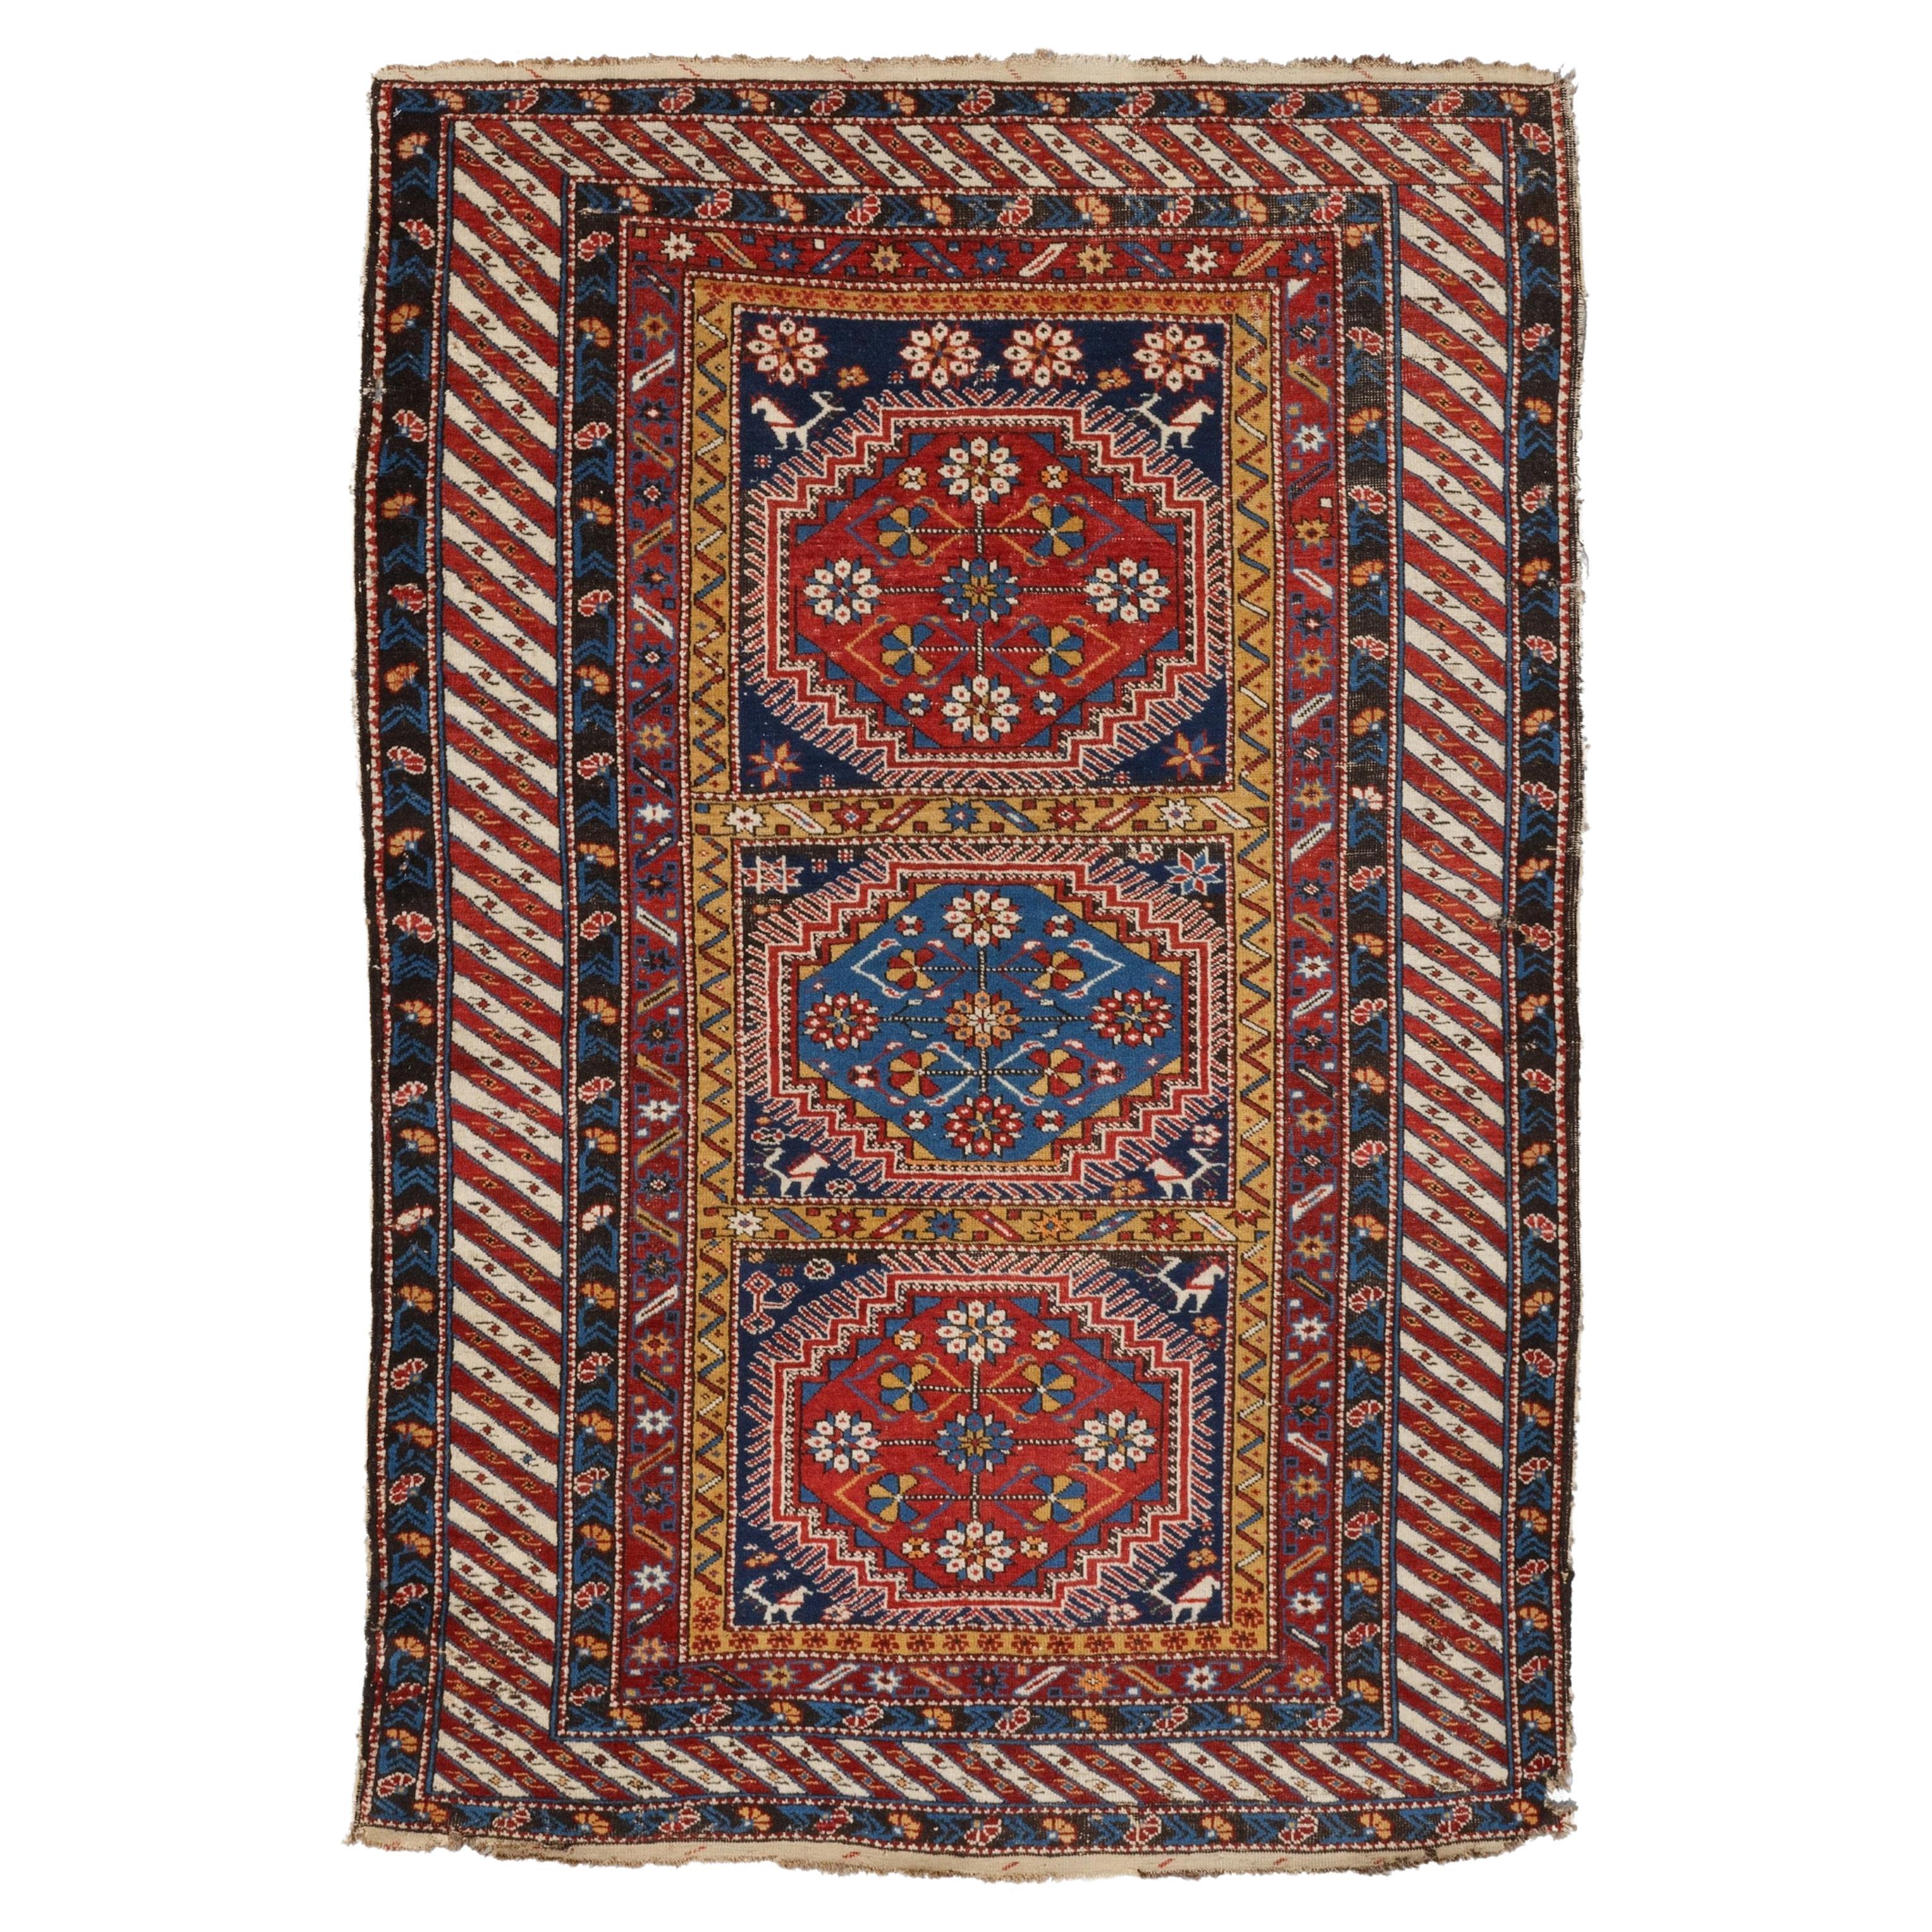 Antique Shirvan Rug - Late Of The 19th Century Caucasian Shirvan Rug For Sale